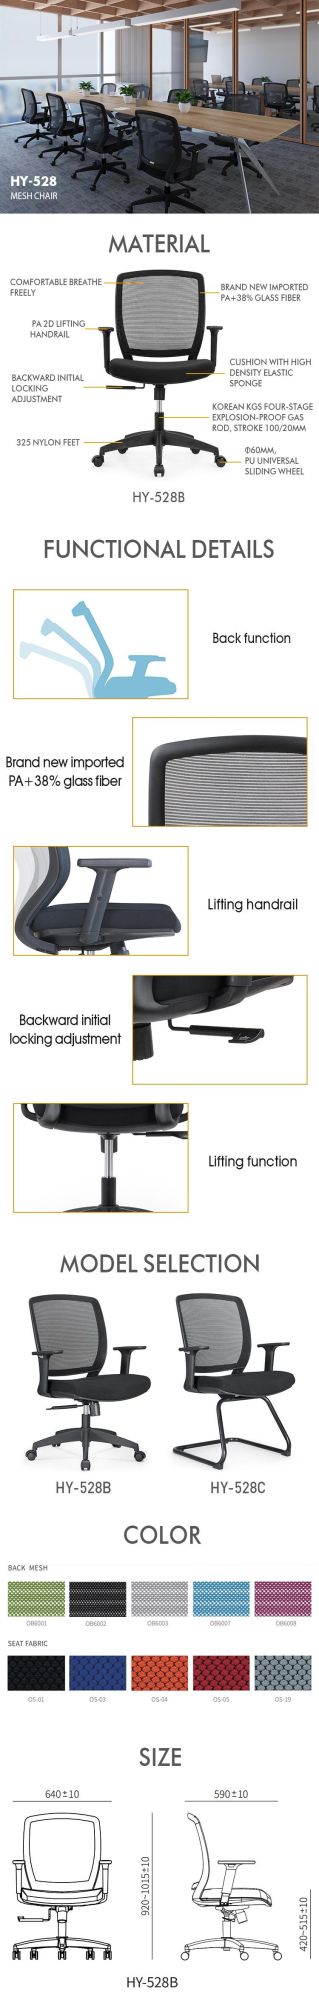 Adjustable Arm MID Denisty Useful Fabric Furniture Computer Office Chair